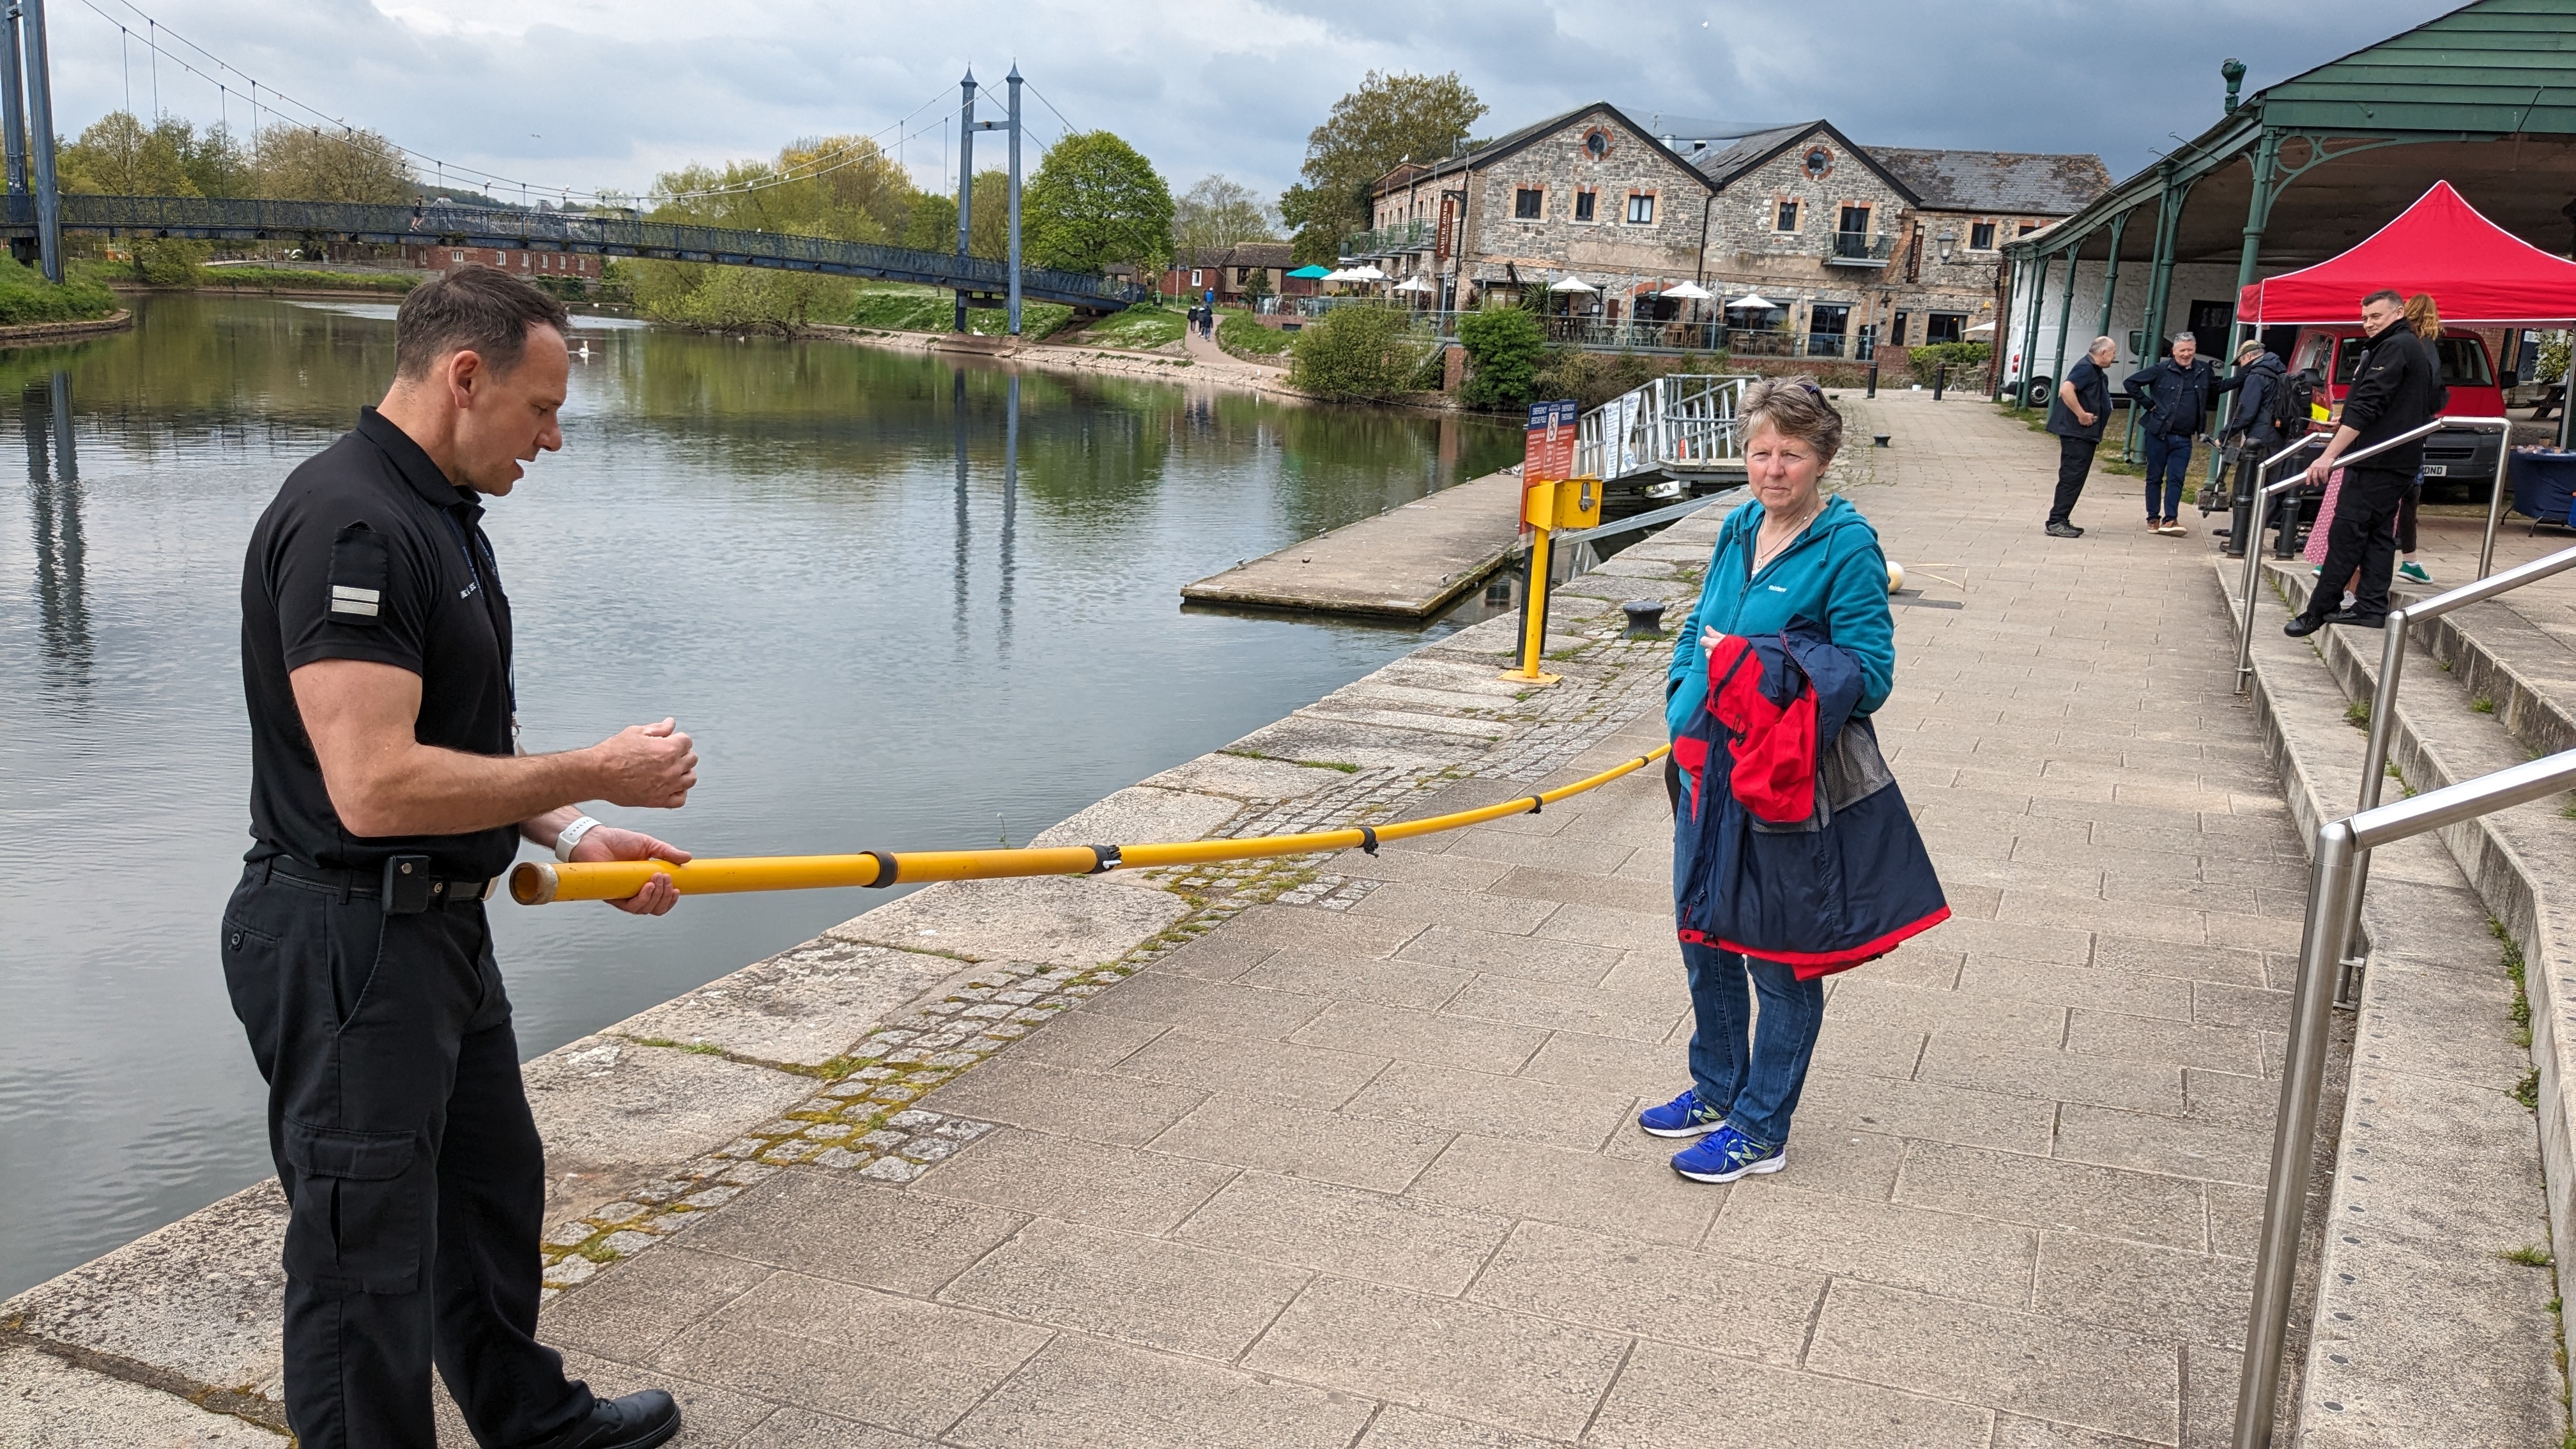 Steve Fisher from the Prevention team at Devon and Somerset Fire and Rescue Service demonstrates how to use life saving equipment to a member of the public on the quayside on Exeter Quay